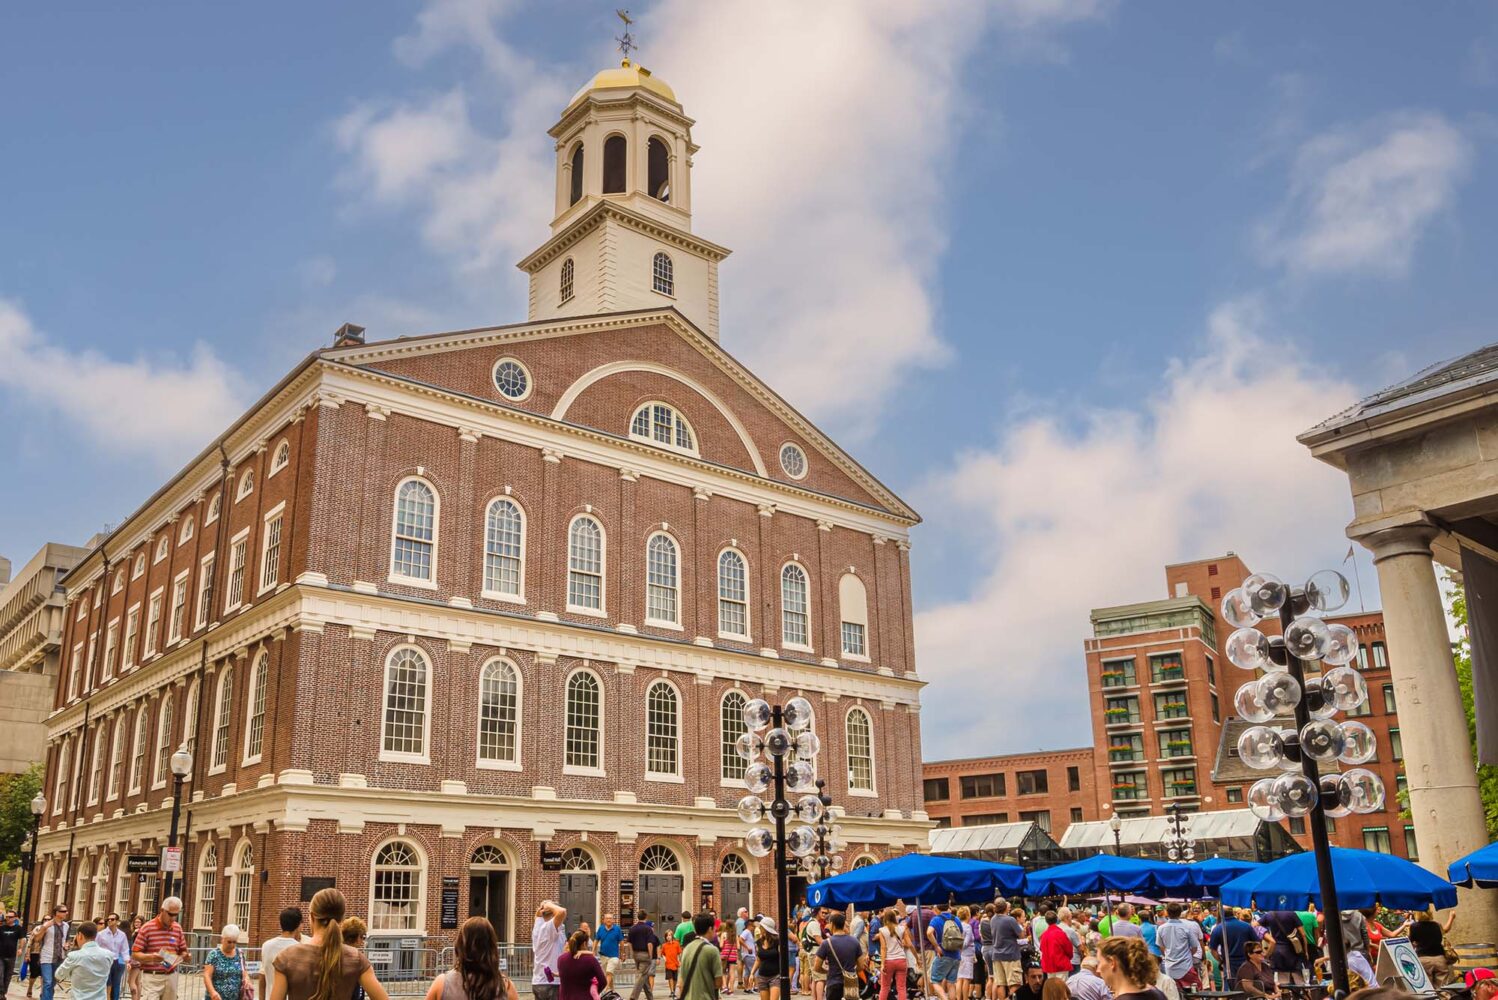 Photo: A picture of the exterior of Faneuil Hall. There are tents and many people walking outside